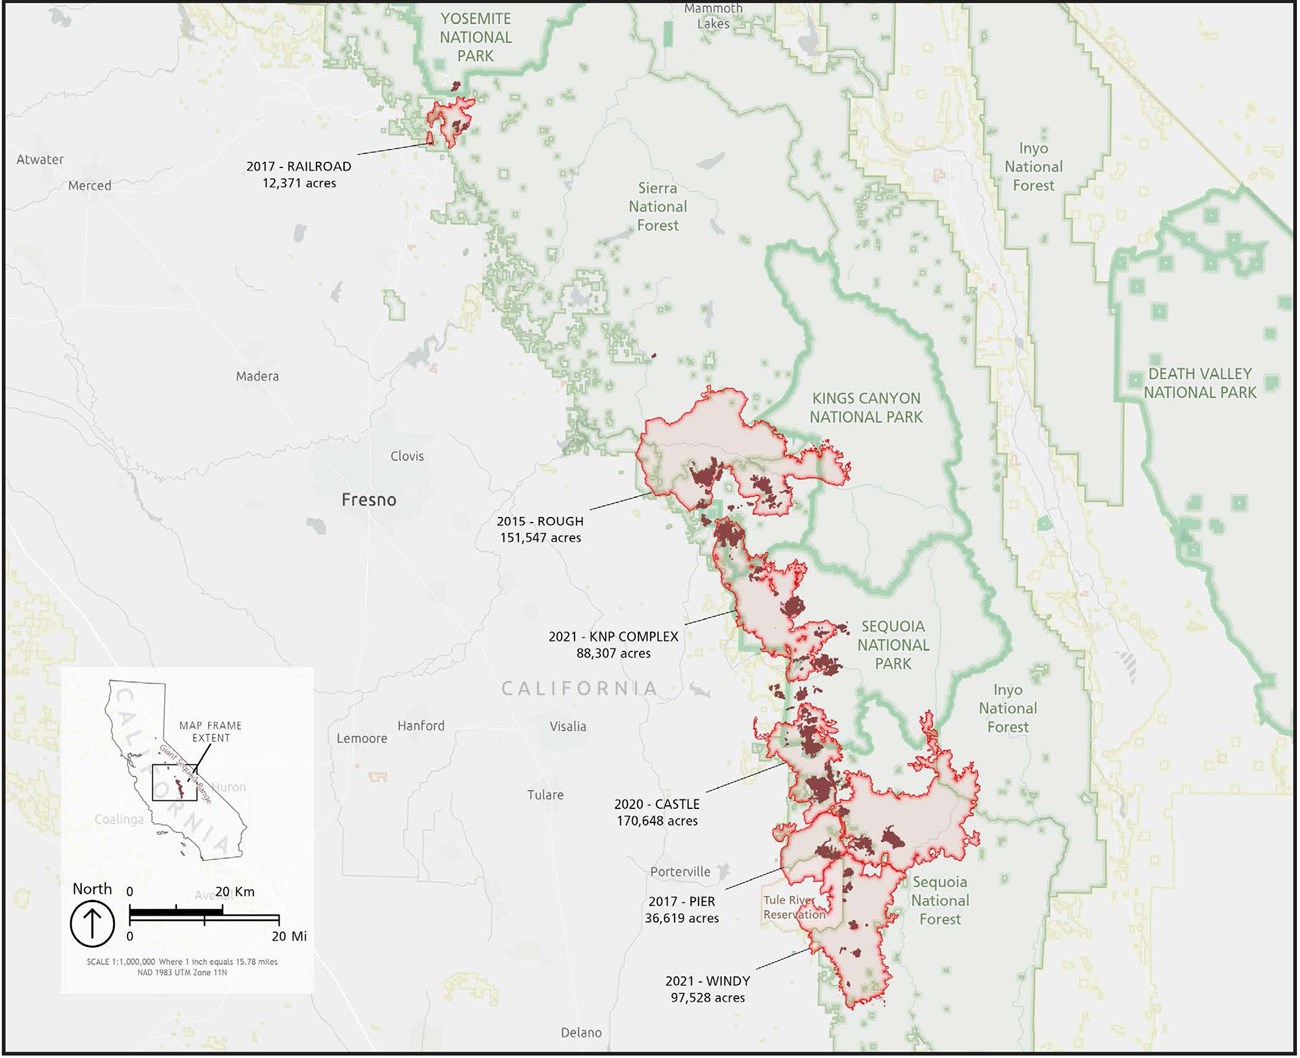 Map highlights six Sierra Nevada wildfires and sequoia groves affected, 2015-2020. National park national forest, and Tule River Reservation  boundaries are also shown.